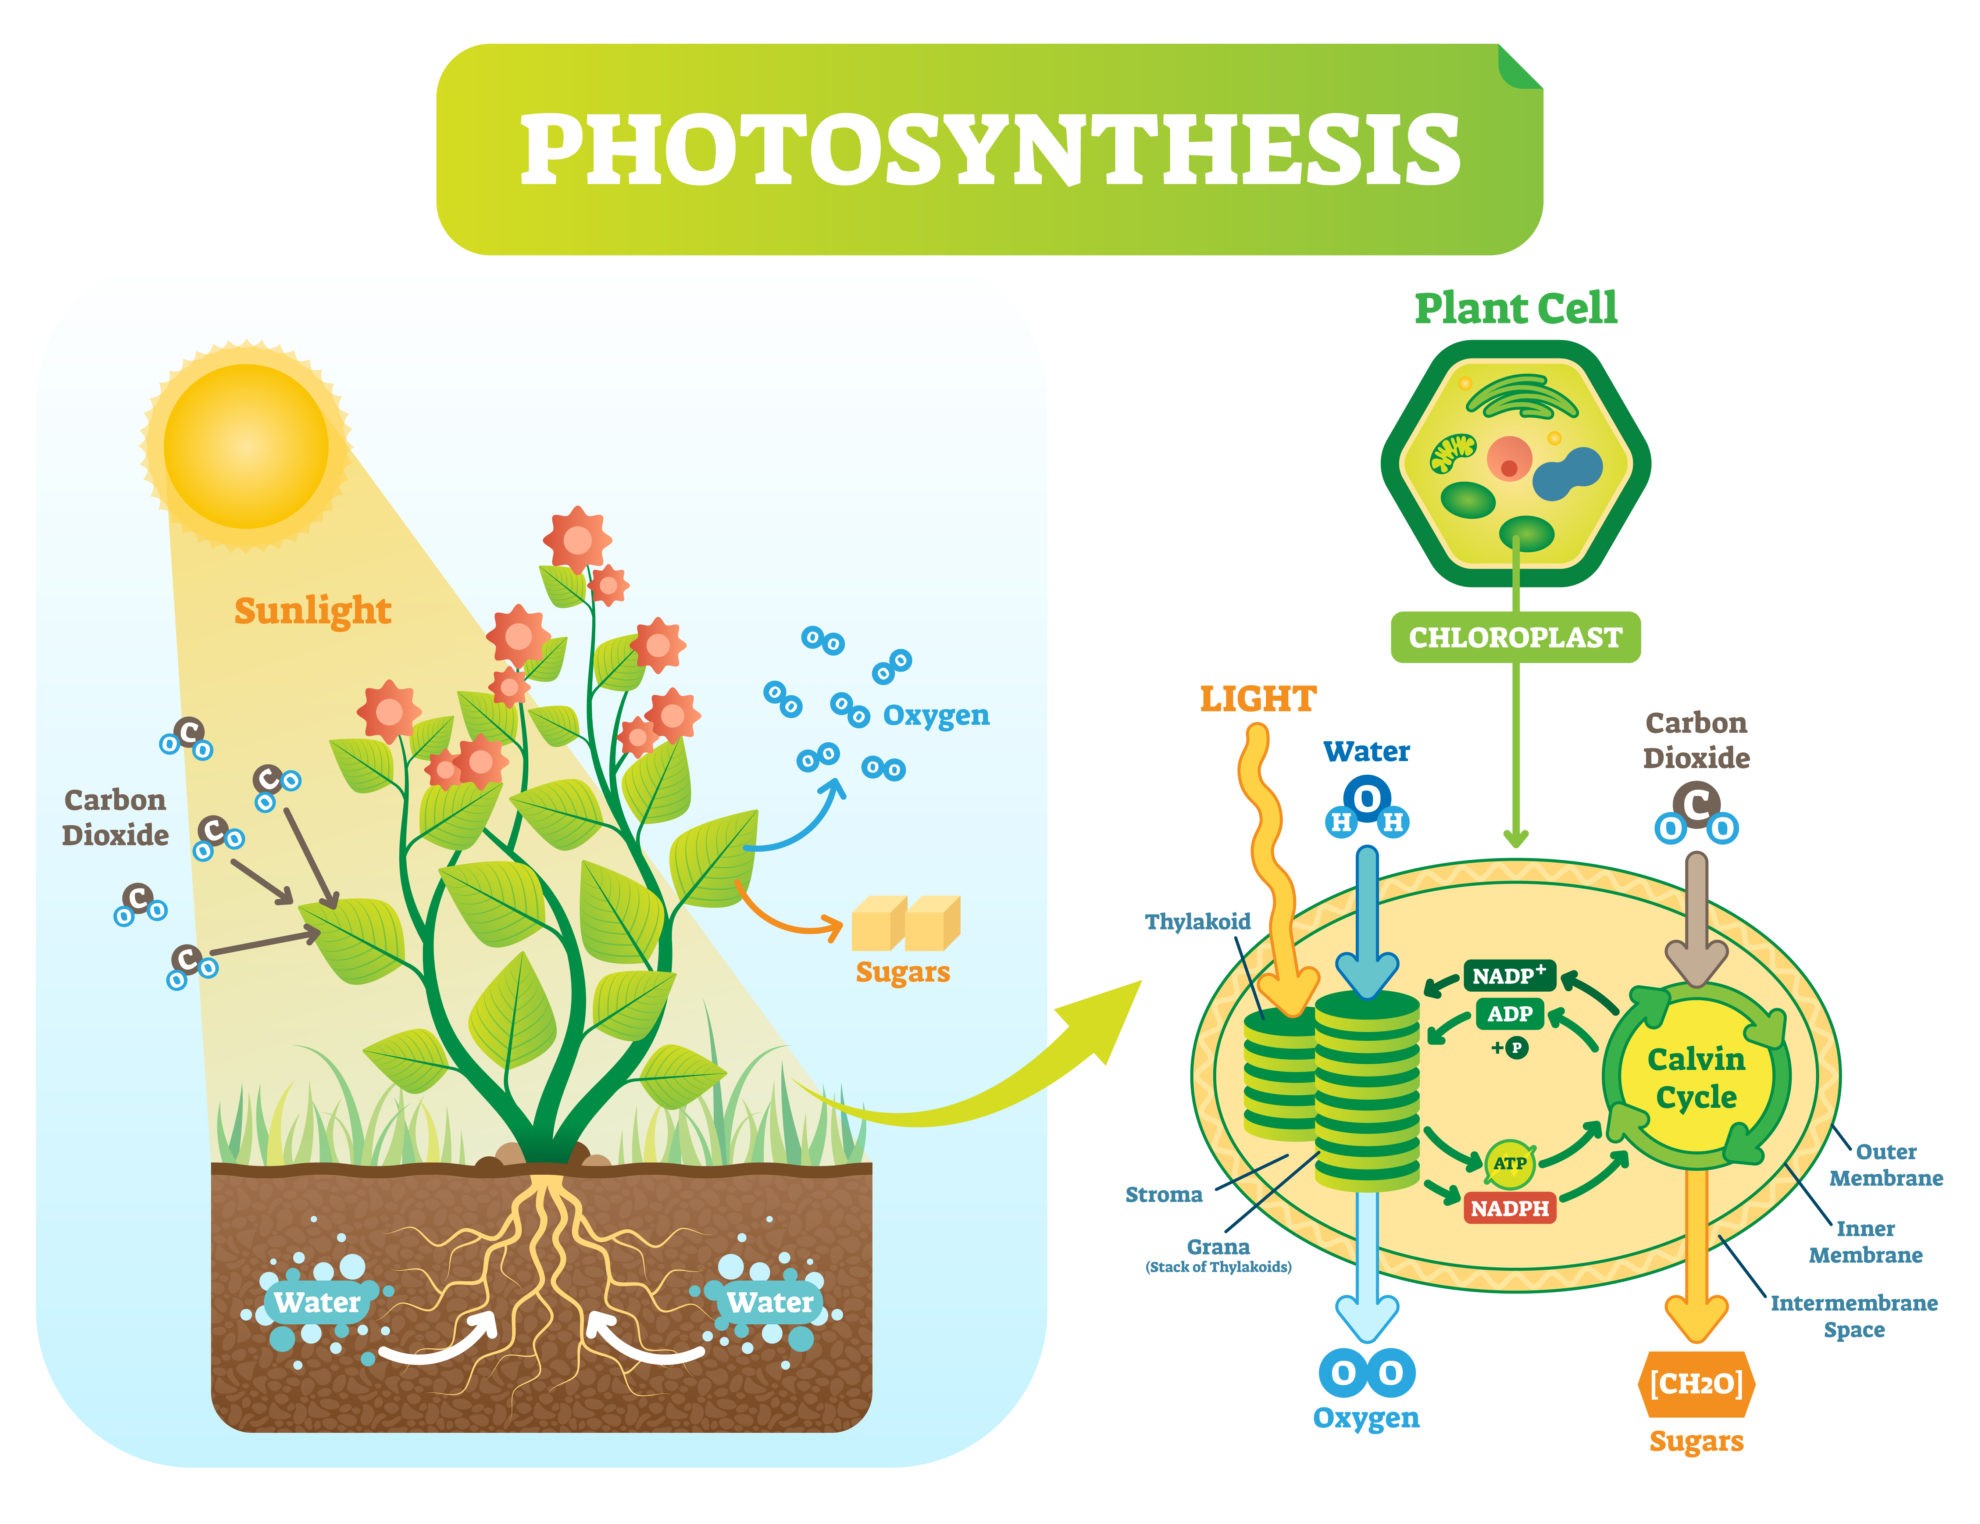 Photosynthesis Photolysis And Carbon Fixation 